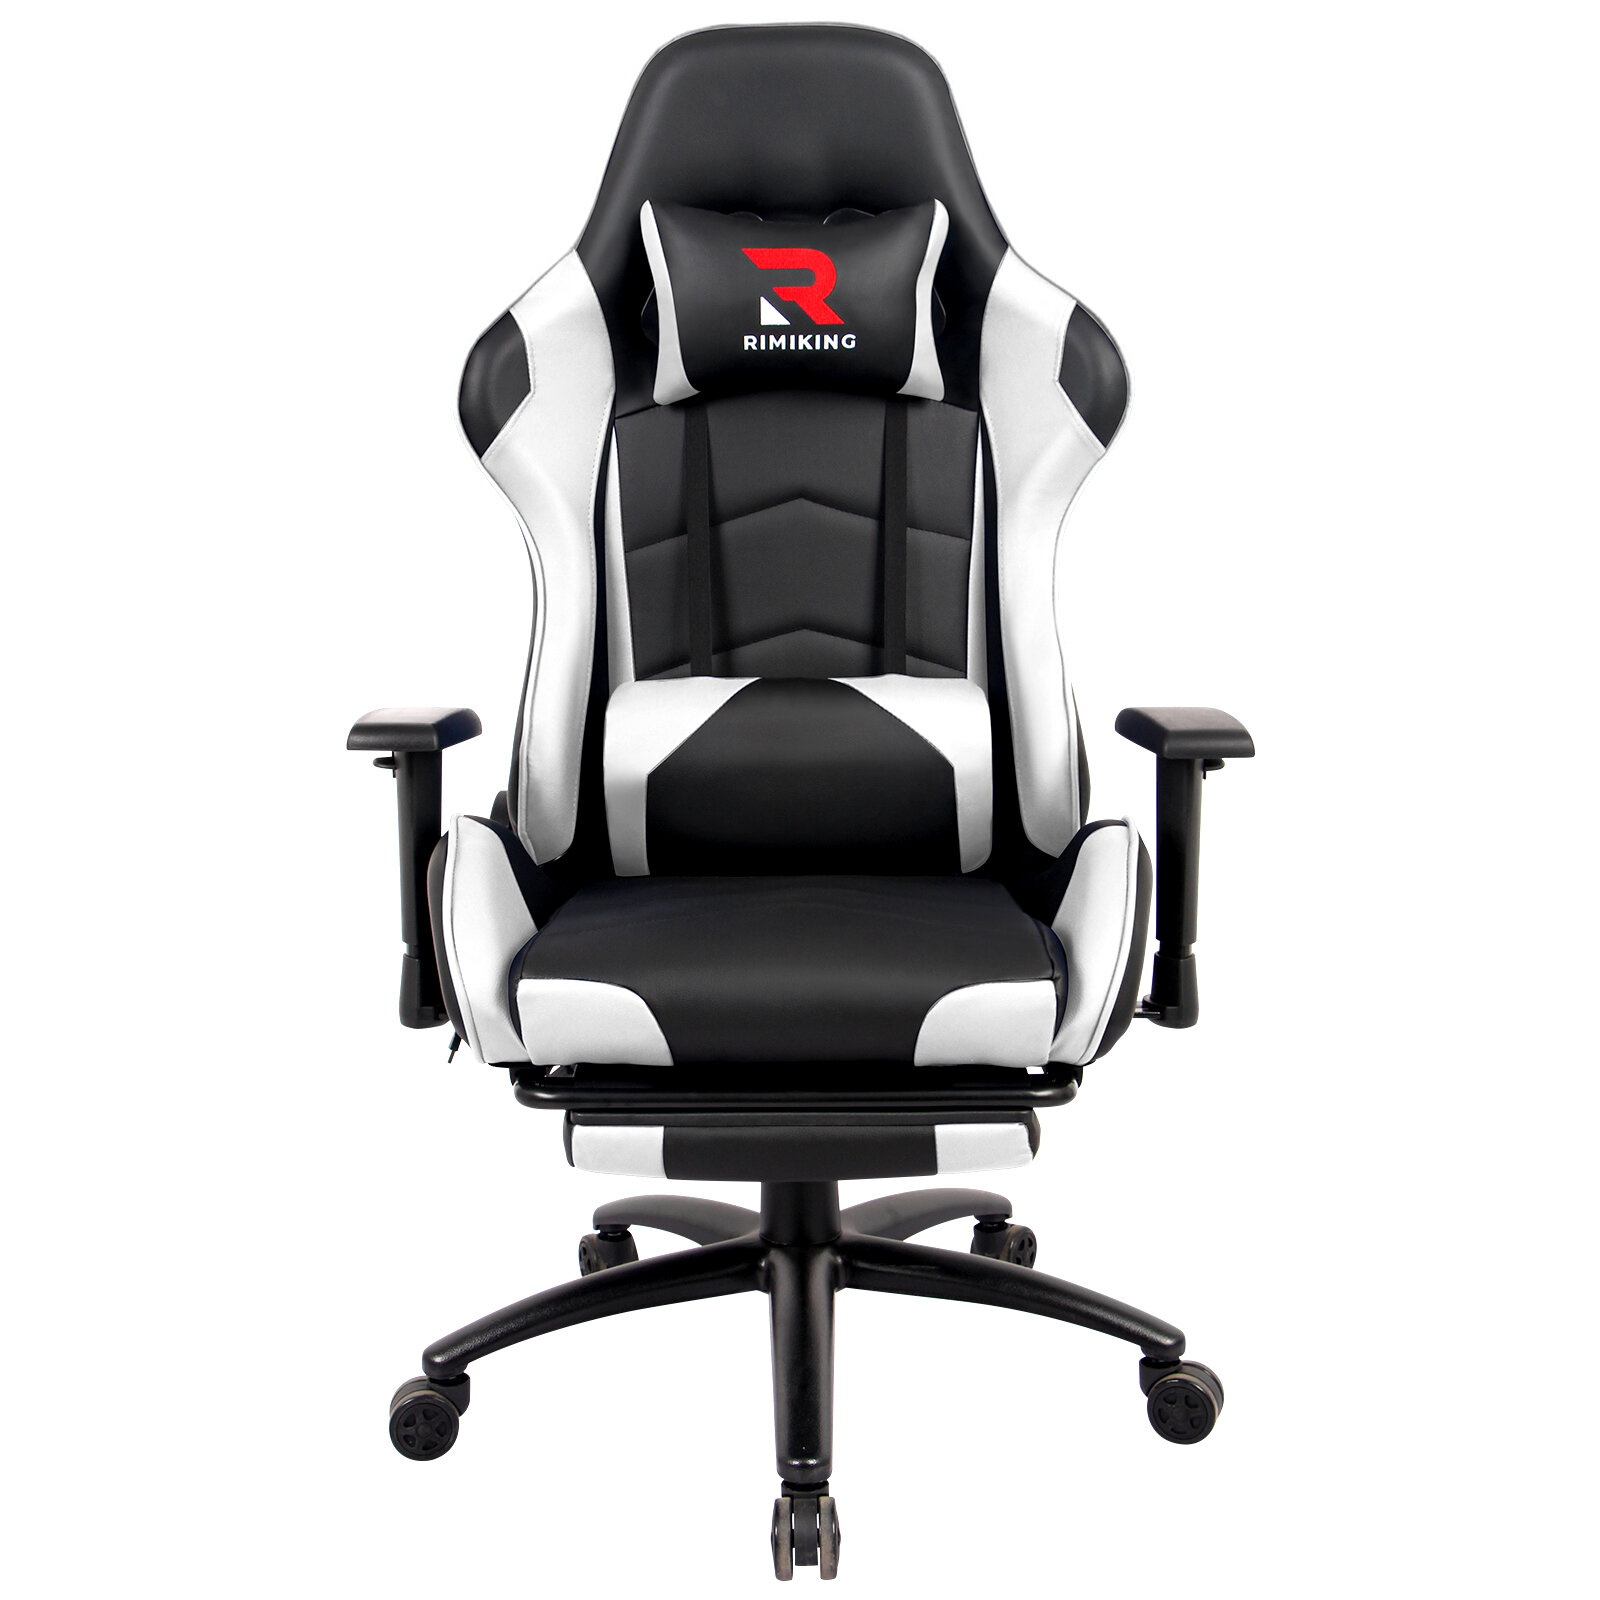 Gymax Red Plastic Massage Gaming Chair Racing Recliner Computer